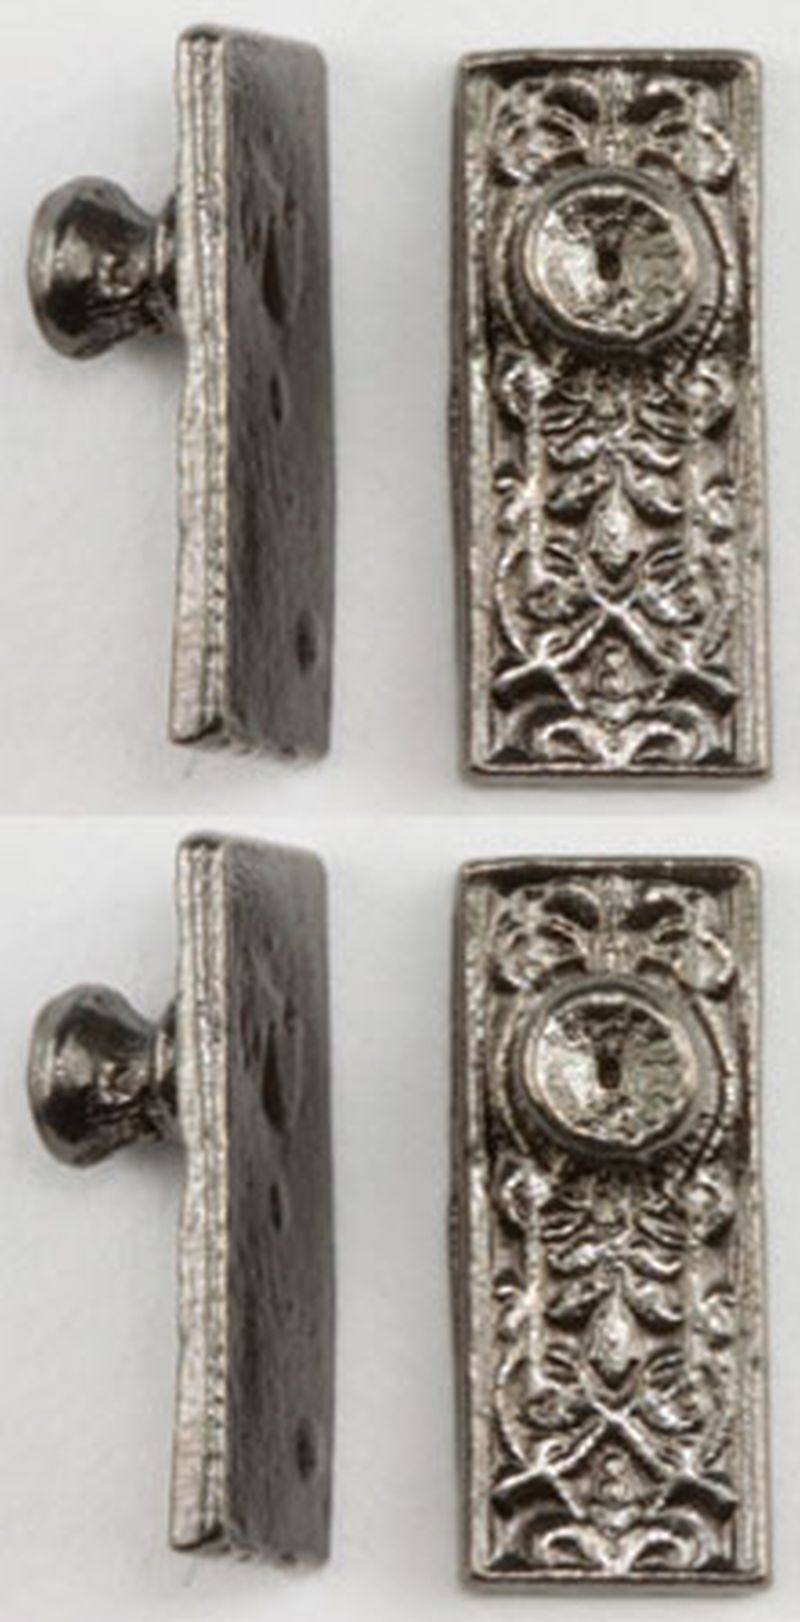 Ornate Door Knobs in Pewter Finish by Classics of Handley House